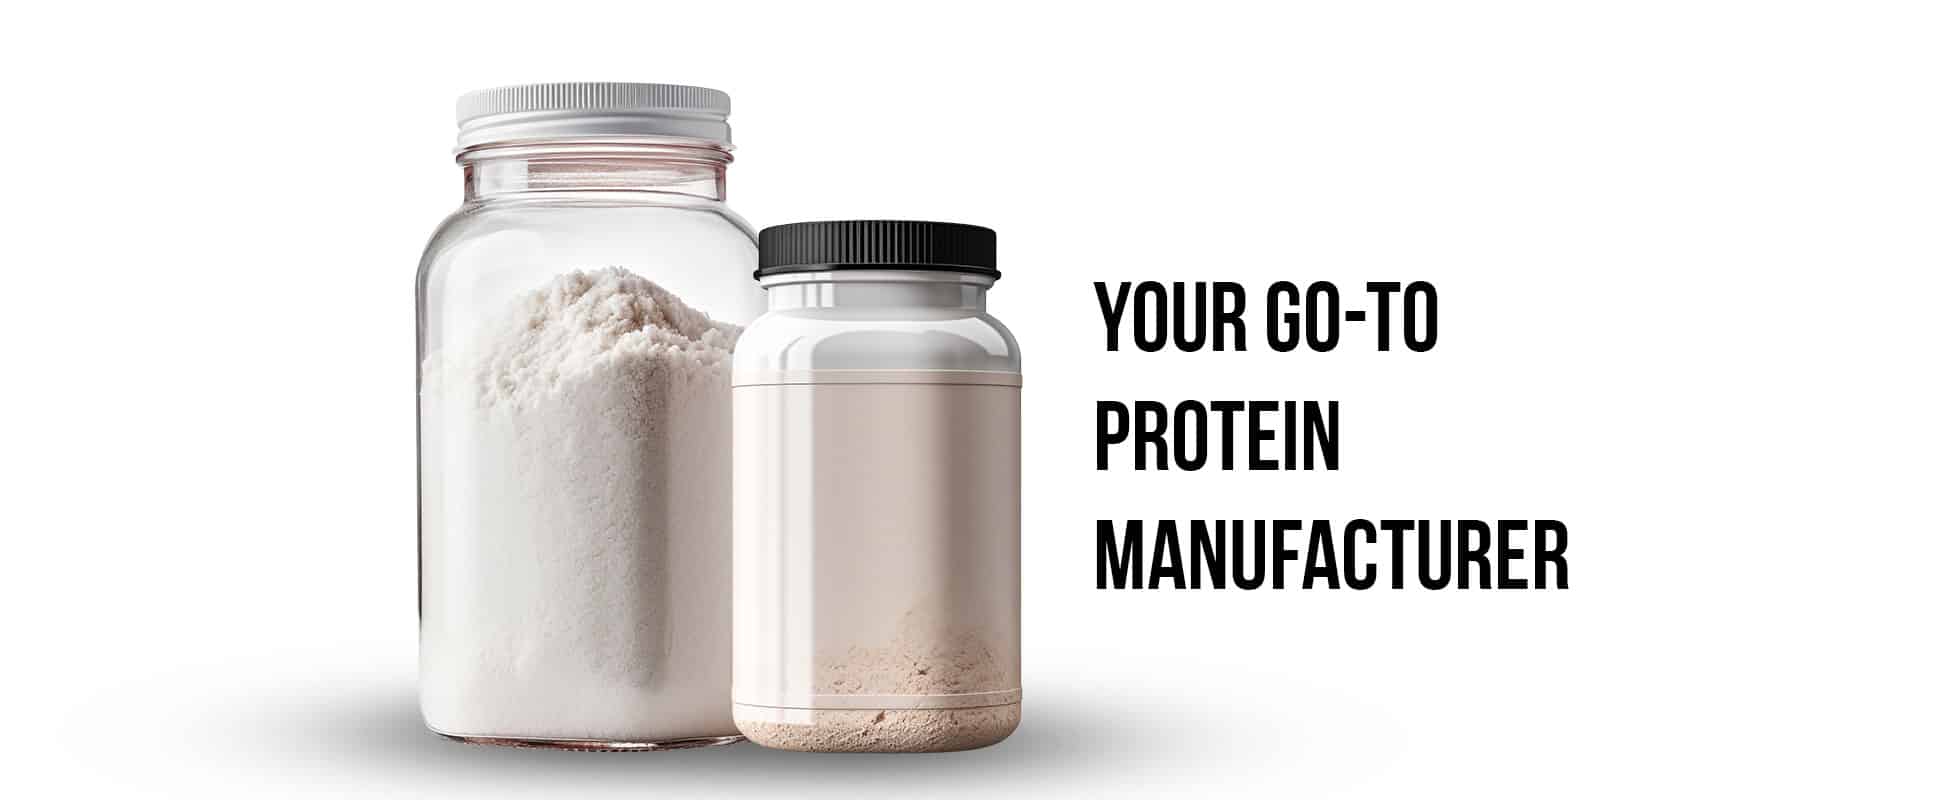 Ready-to-drink protein supplements manufactured by VBC